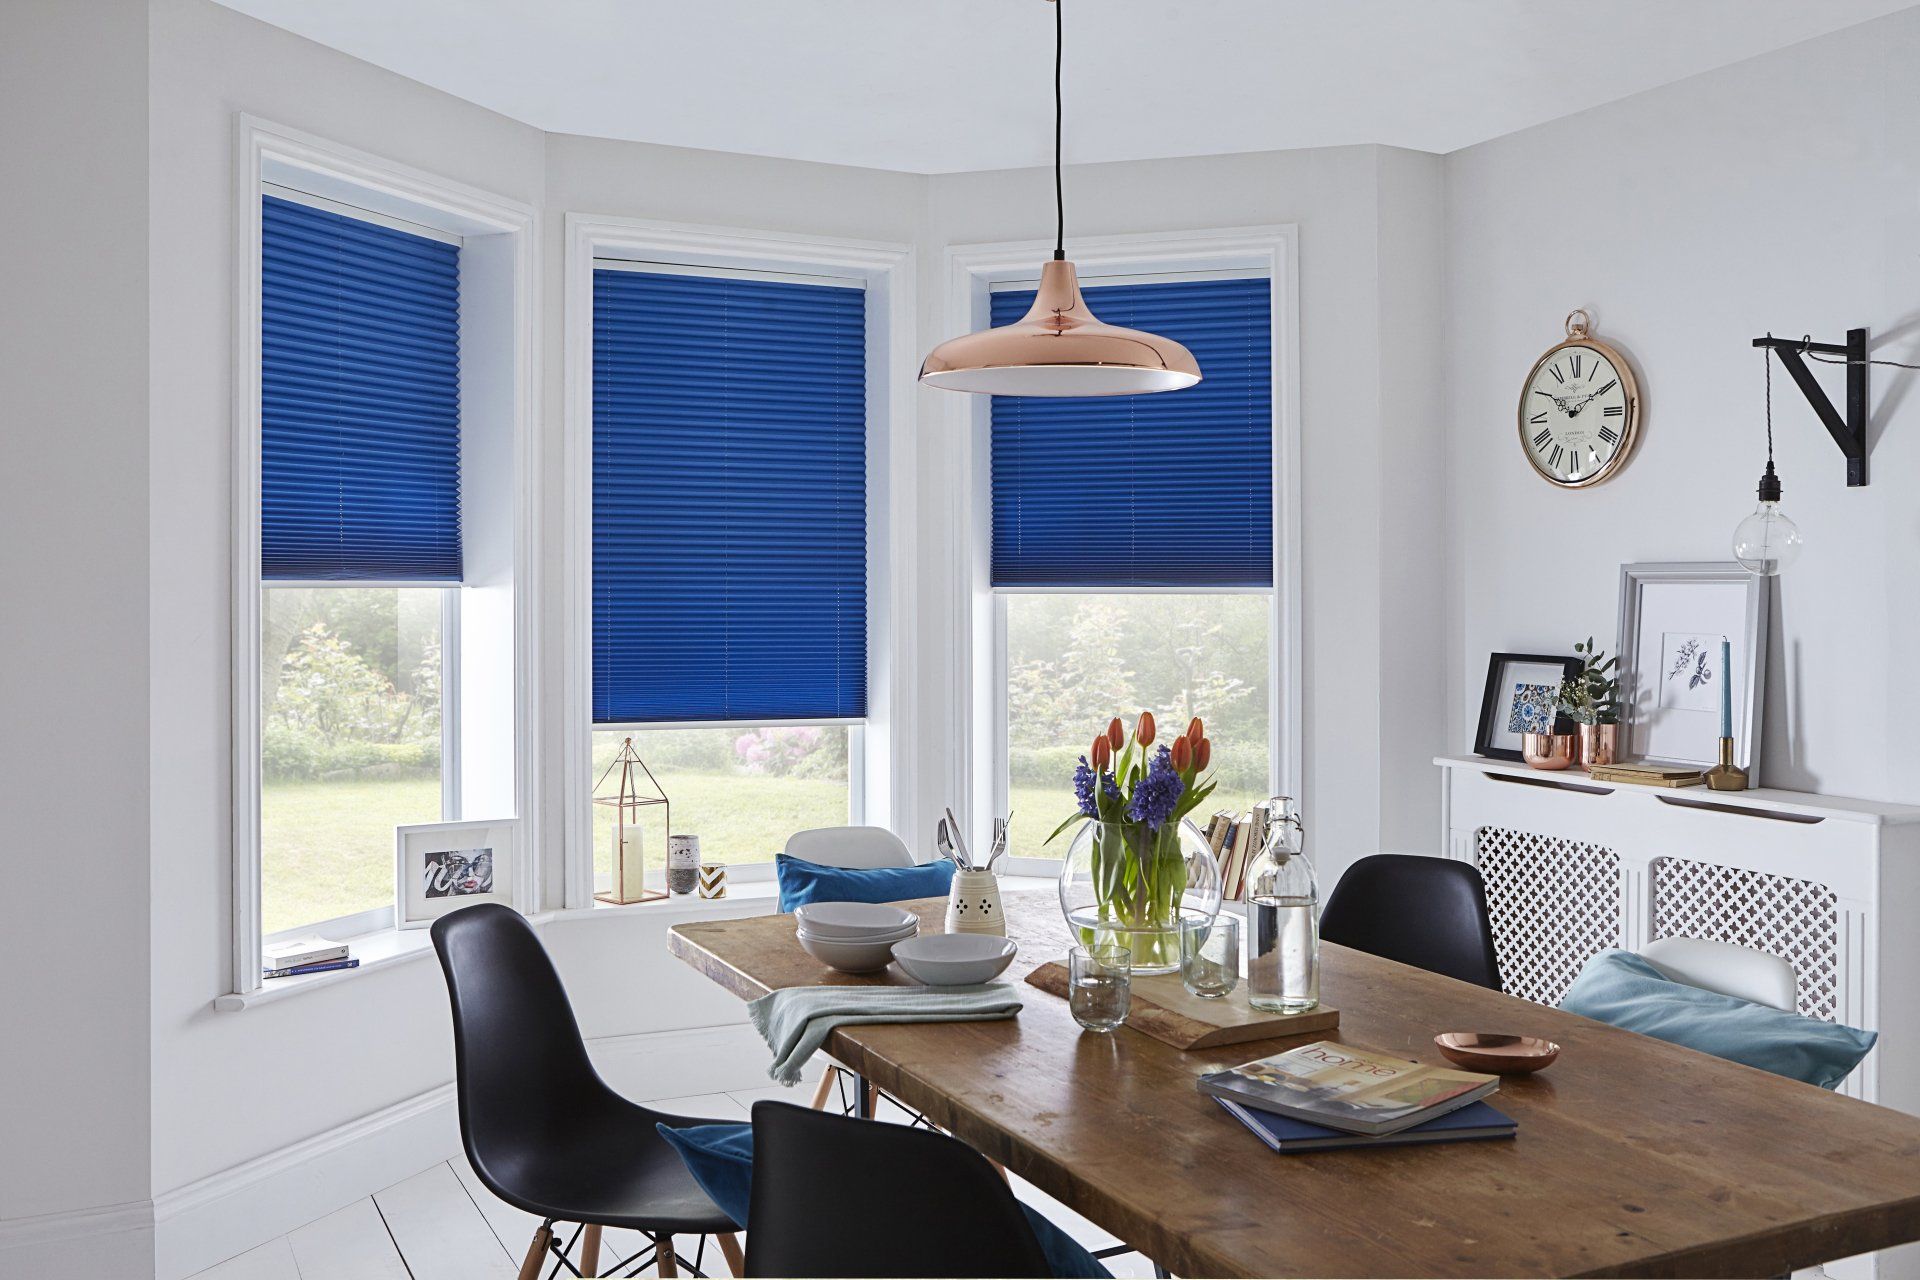 If you want blue roller blinds, visit us